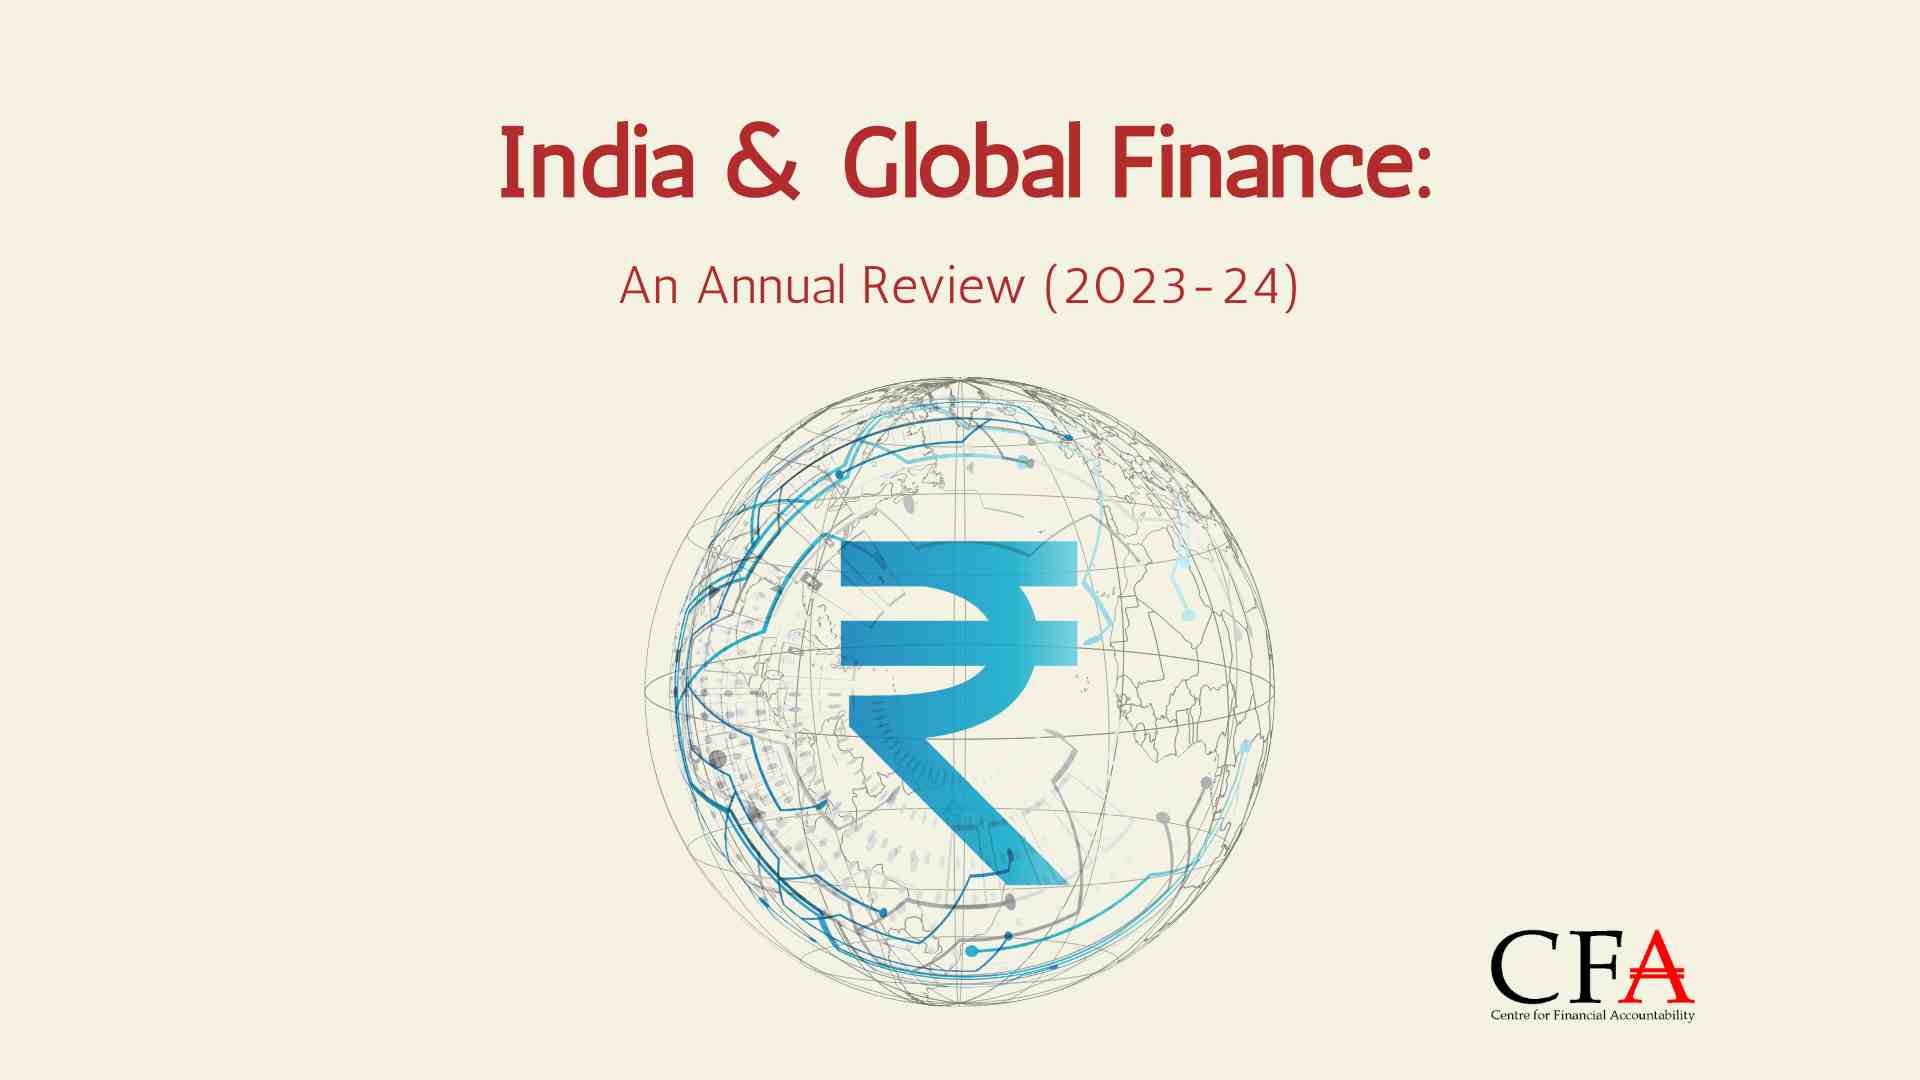 India & Global Finance: An Annual Review (2023-24)